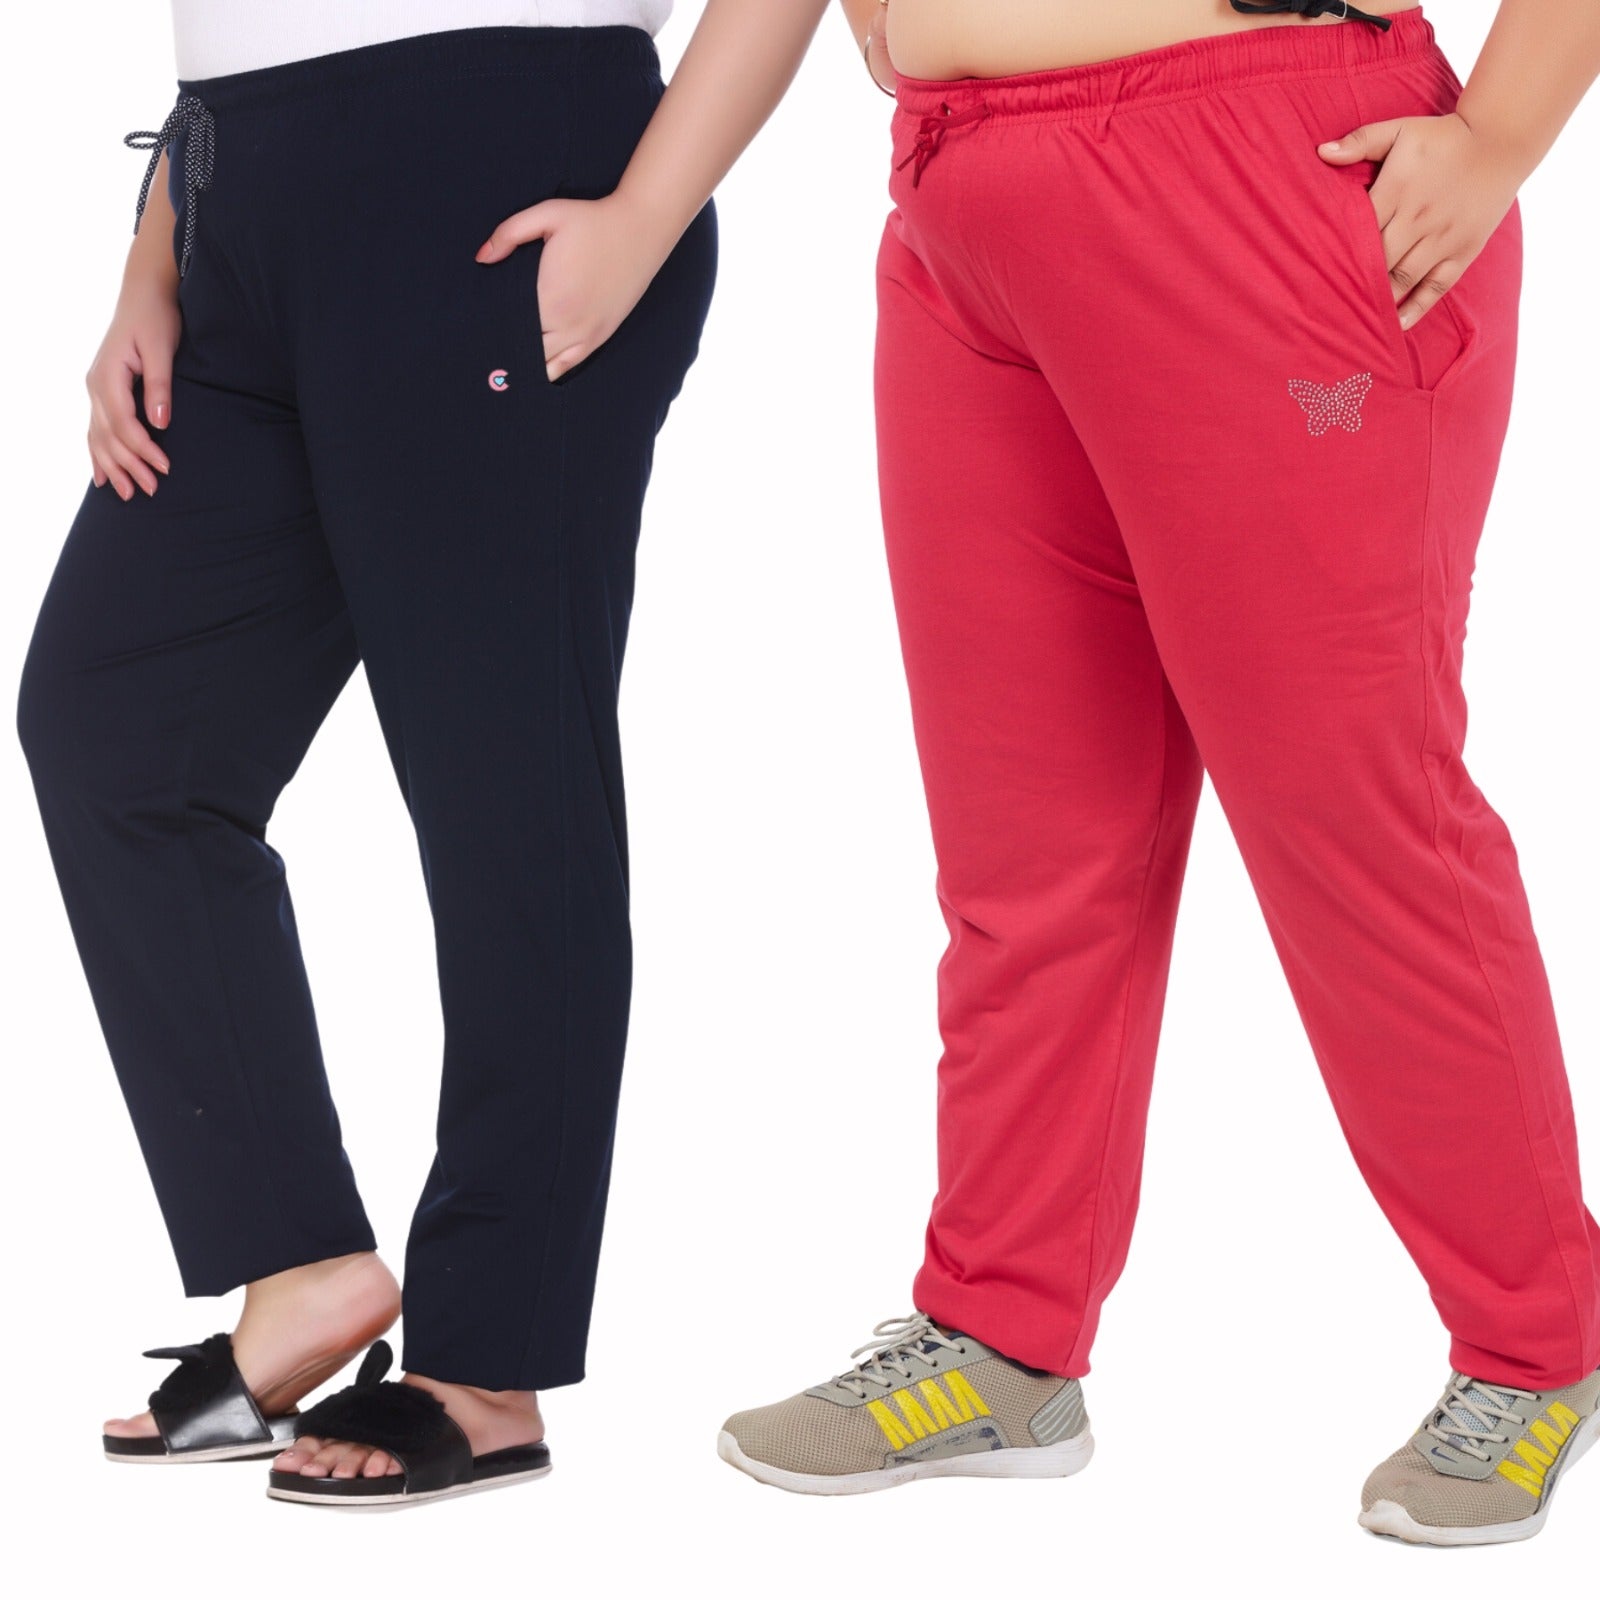 Easy 2 Wear Womens Cotton Knitted Track Pant (Sizes S to 4XL) Full Length  and Plus Sizes (Zip Pocket)